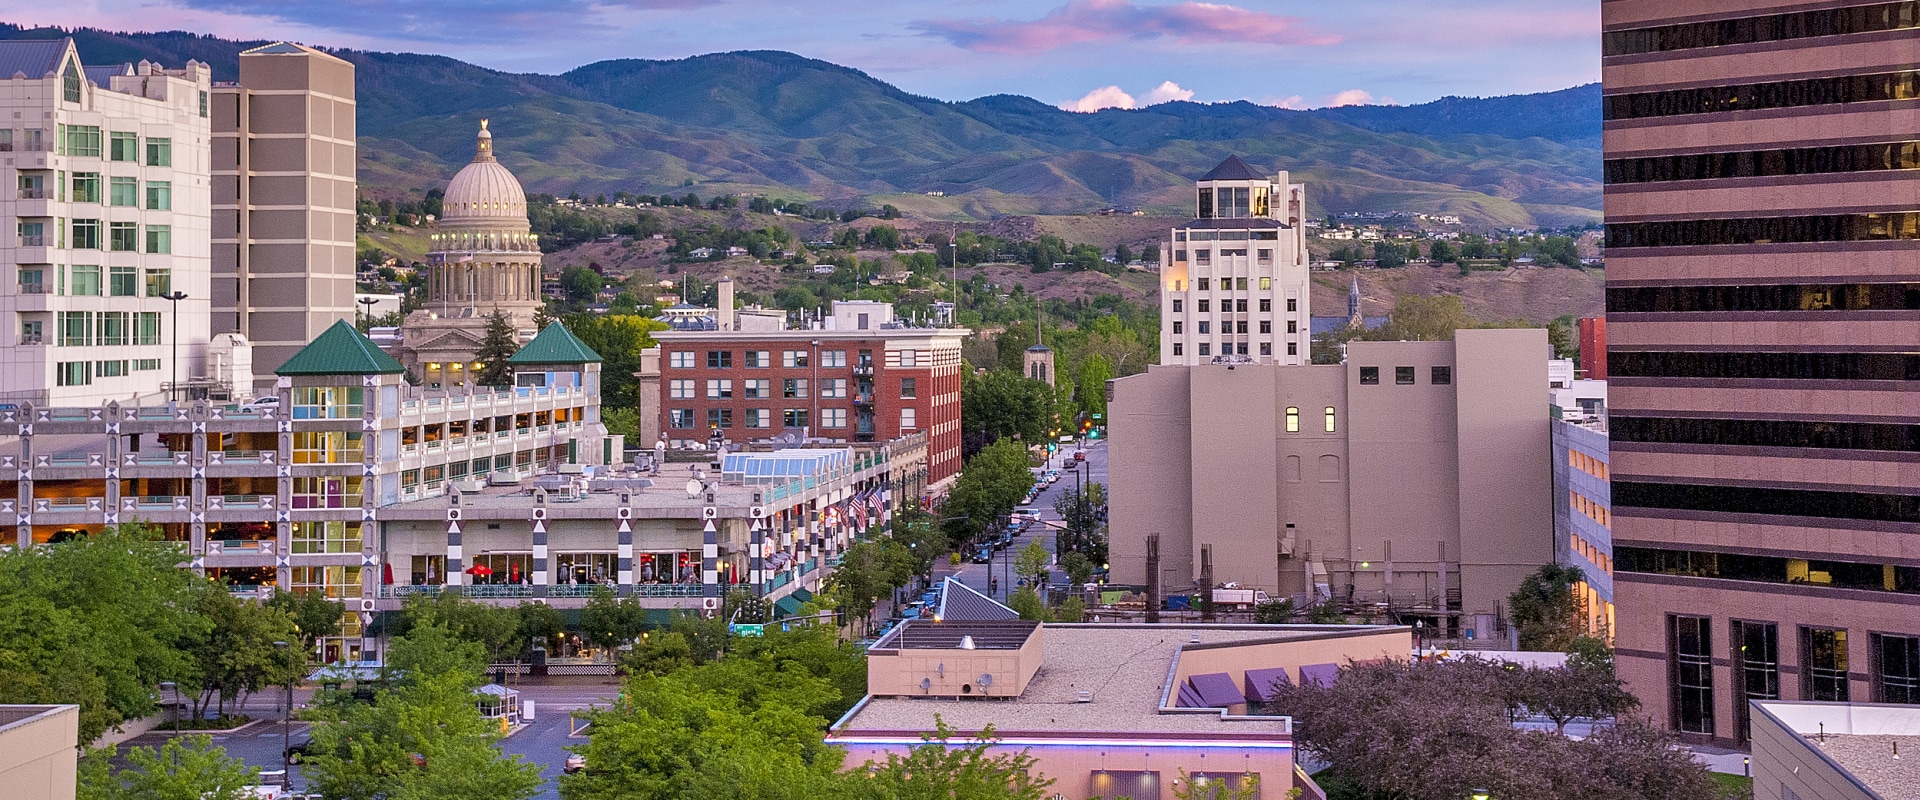 Why is it so expensive to live in boise idaho?